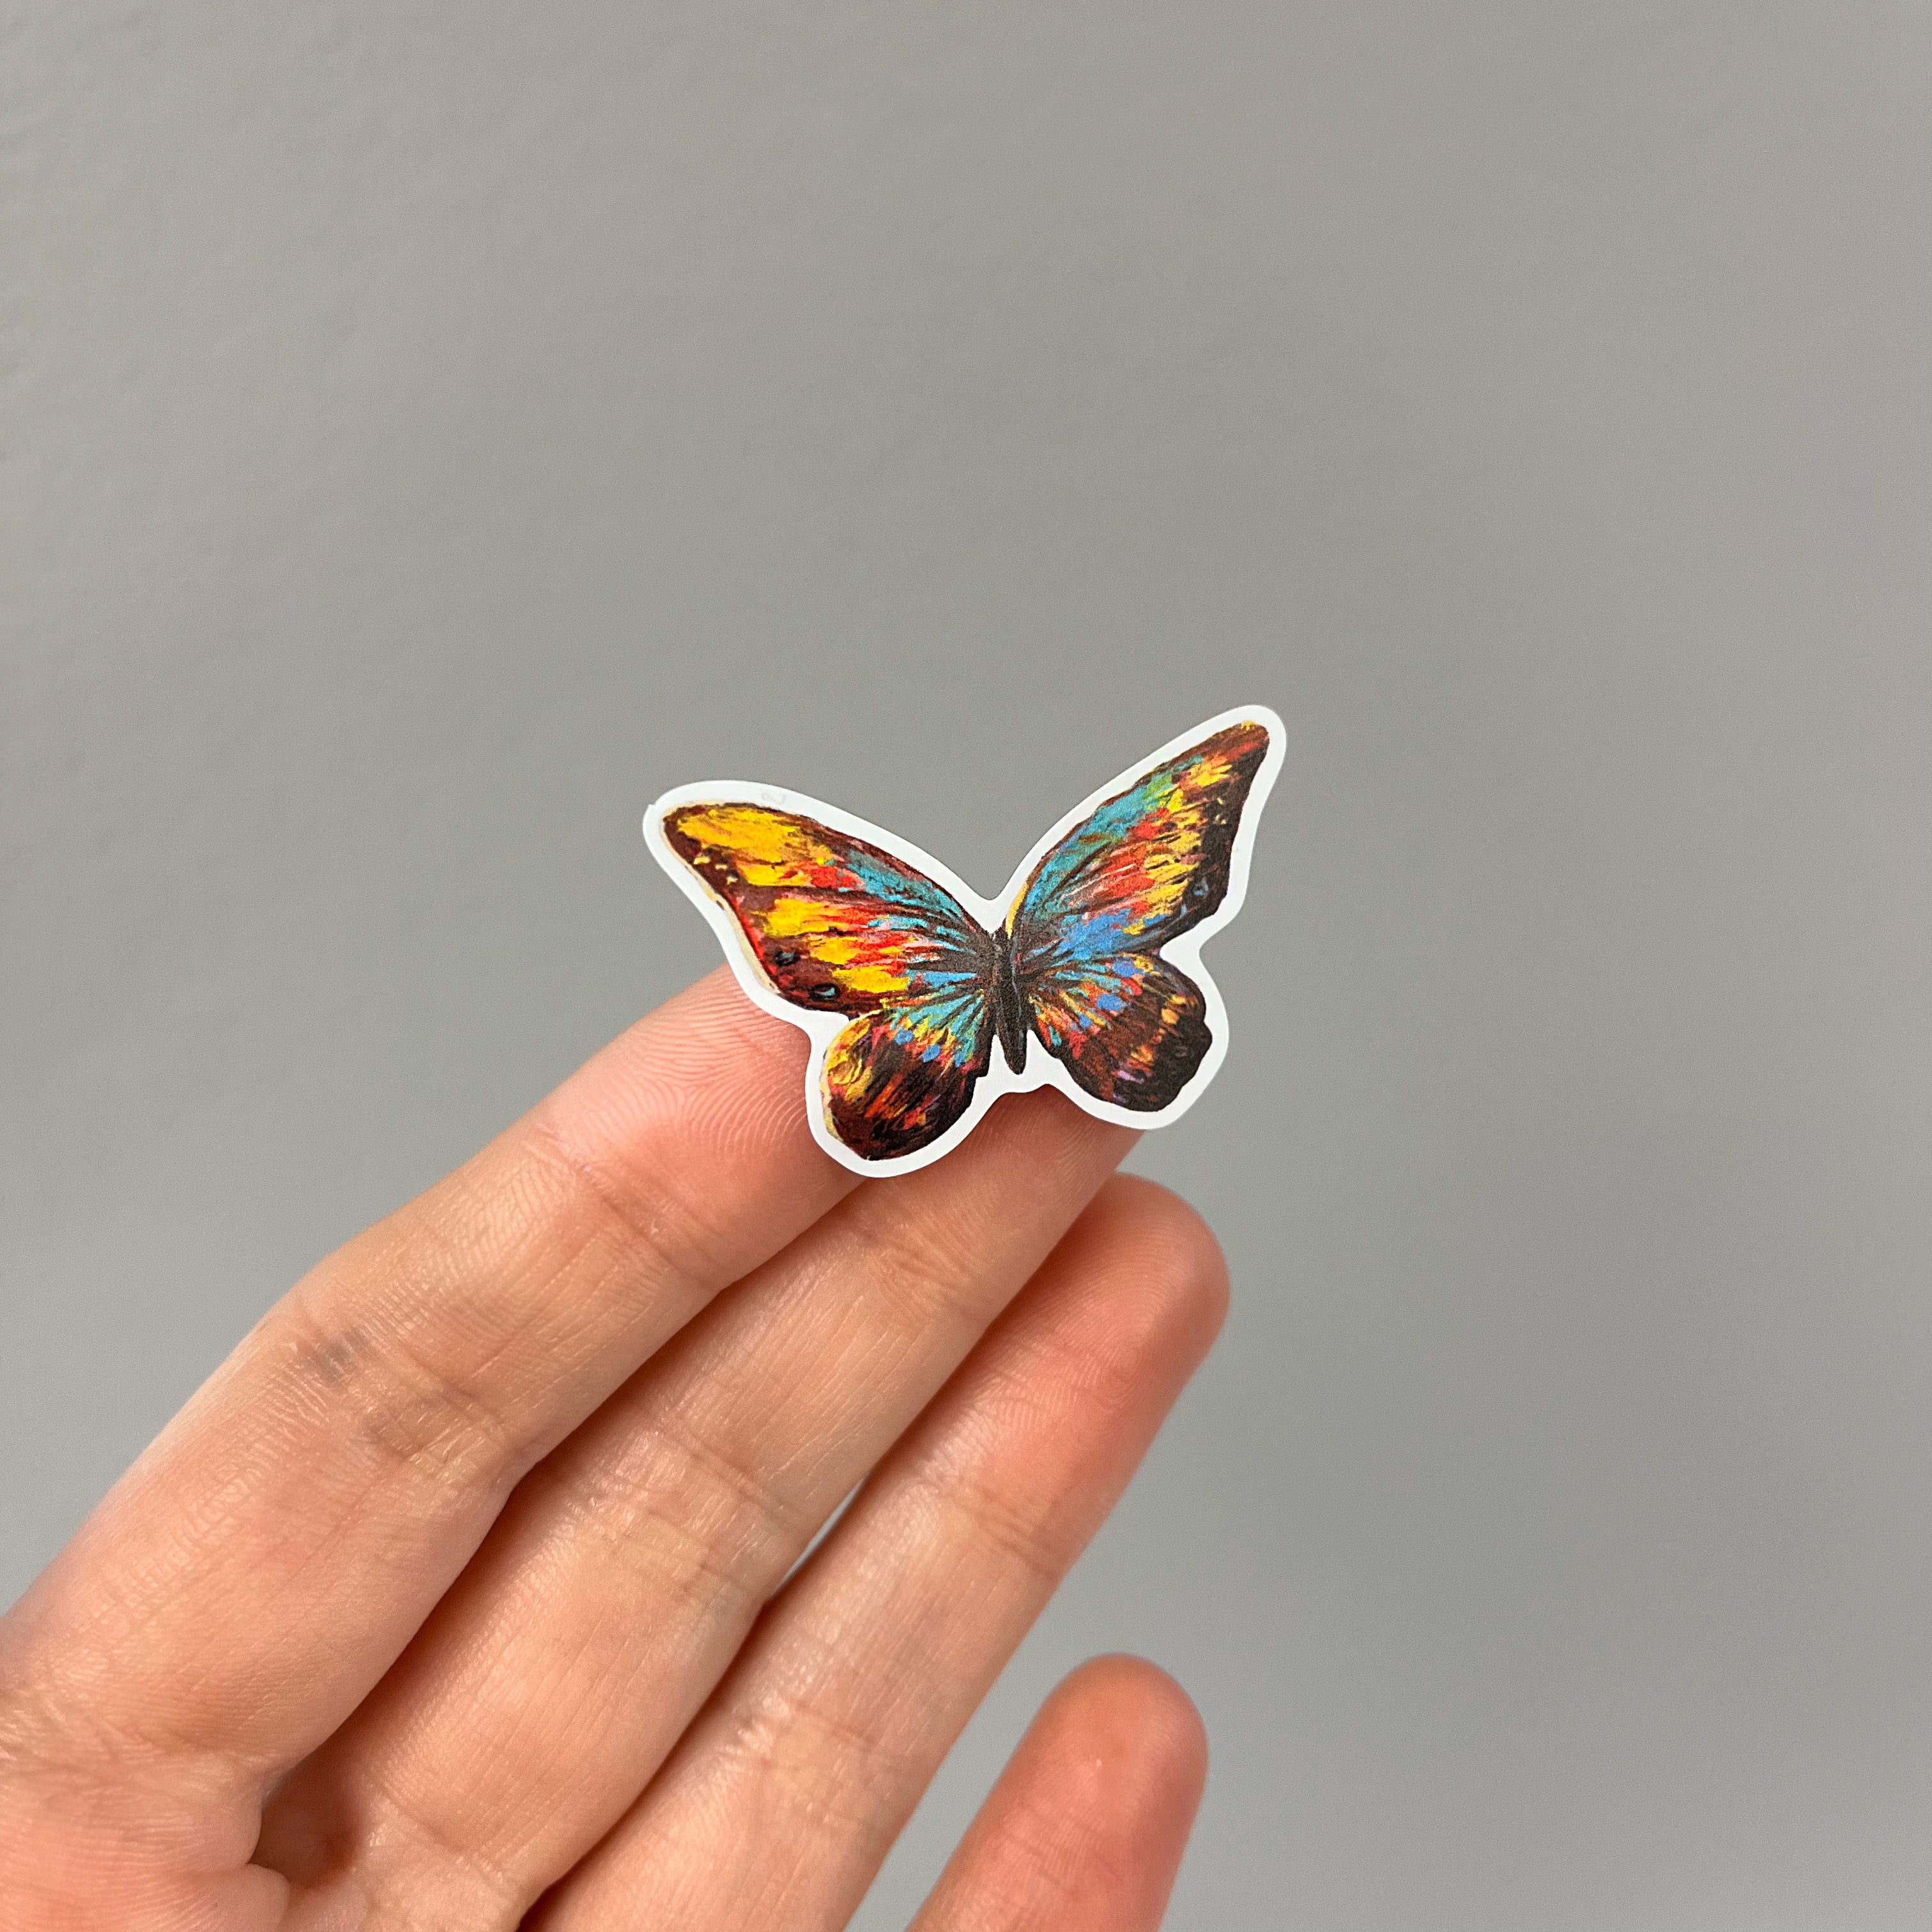 Hand holding a sticker featuring a print of a butterfly painting artwork.